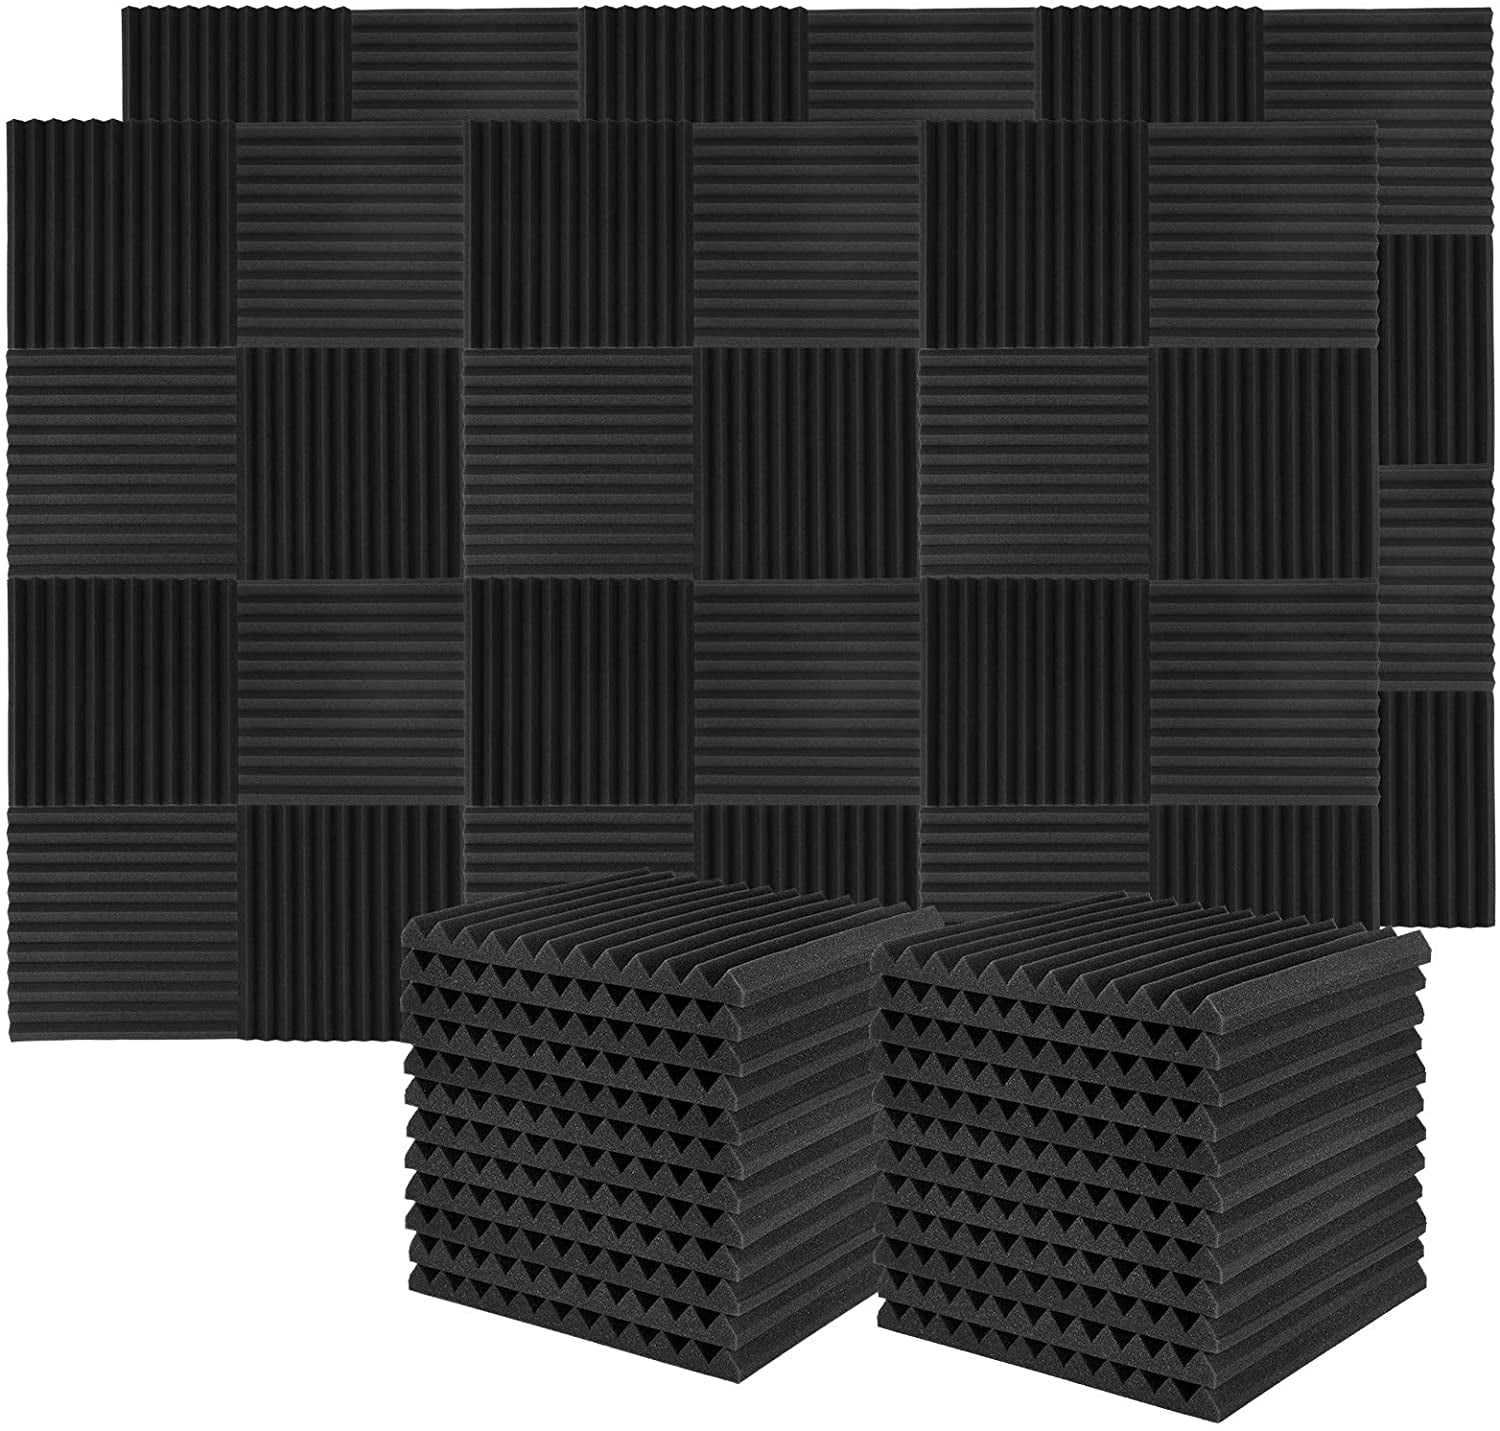 Absorbing Sound Proof Dampening and Padding Insulation Panel Soundproof Acoustic Foam Panels 12 Pack 2 X 12 X 12 Soundproofing Black Wedges Fireproof Studio Foam 